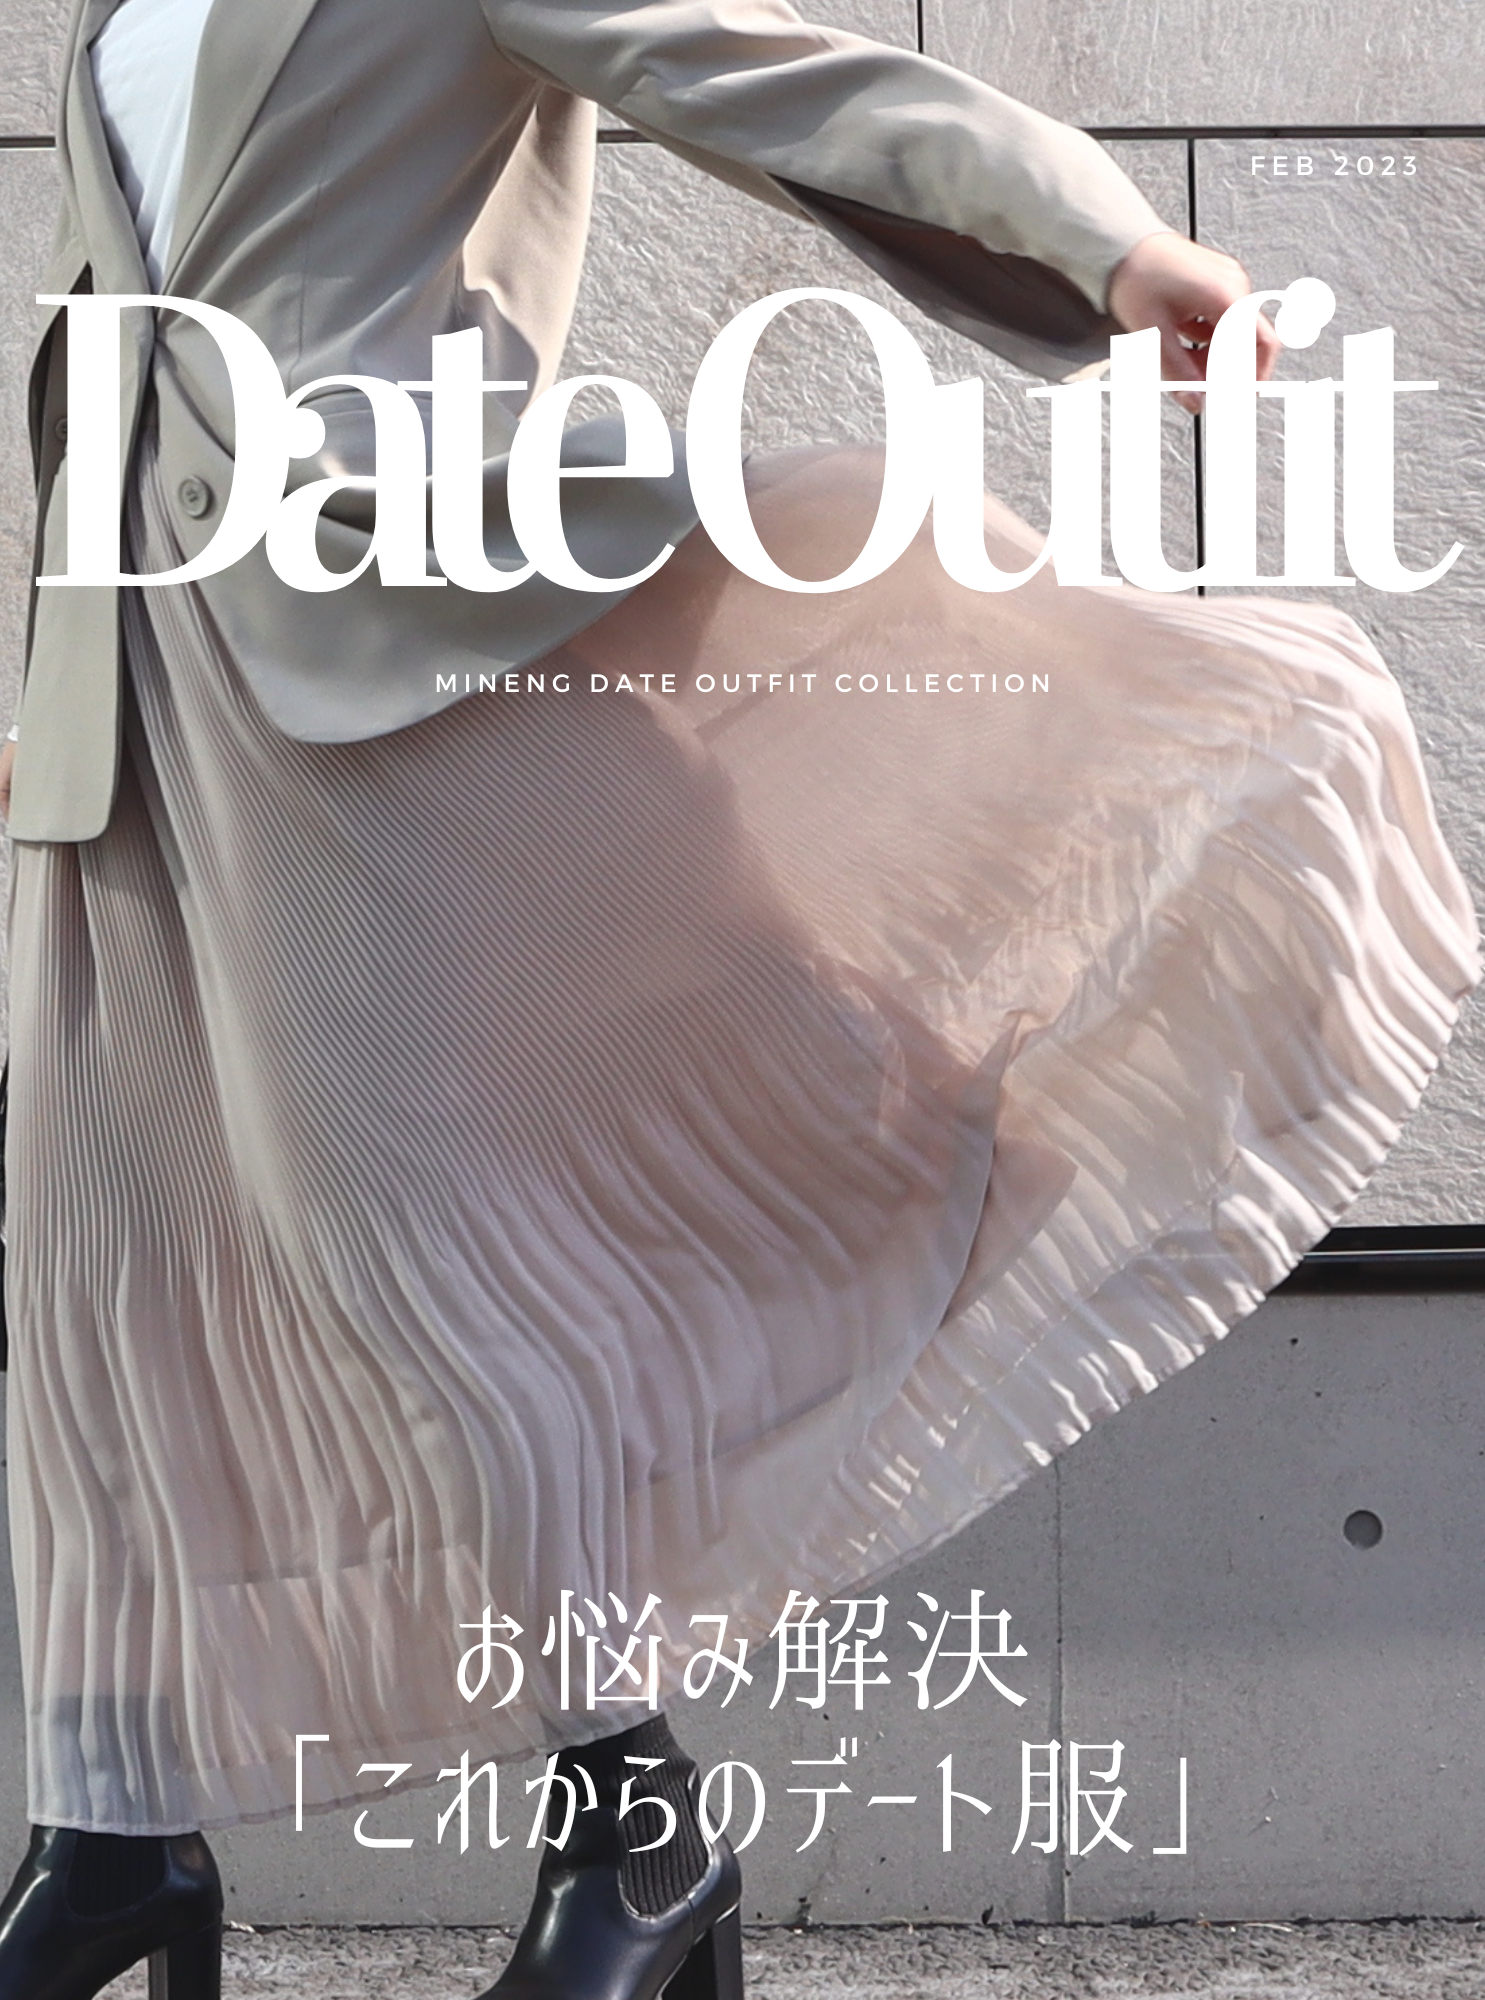 DATE OUTFIT COLLECTION